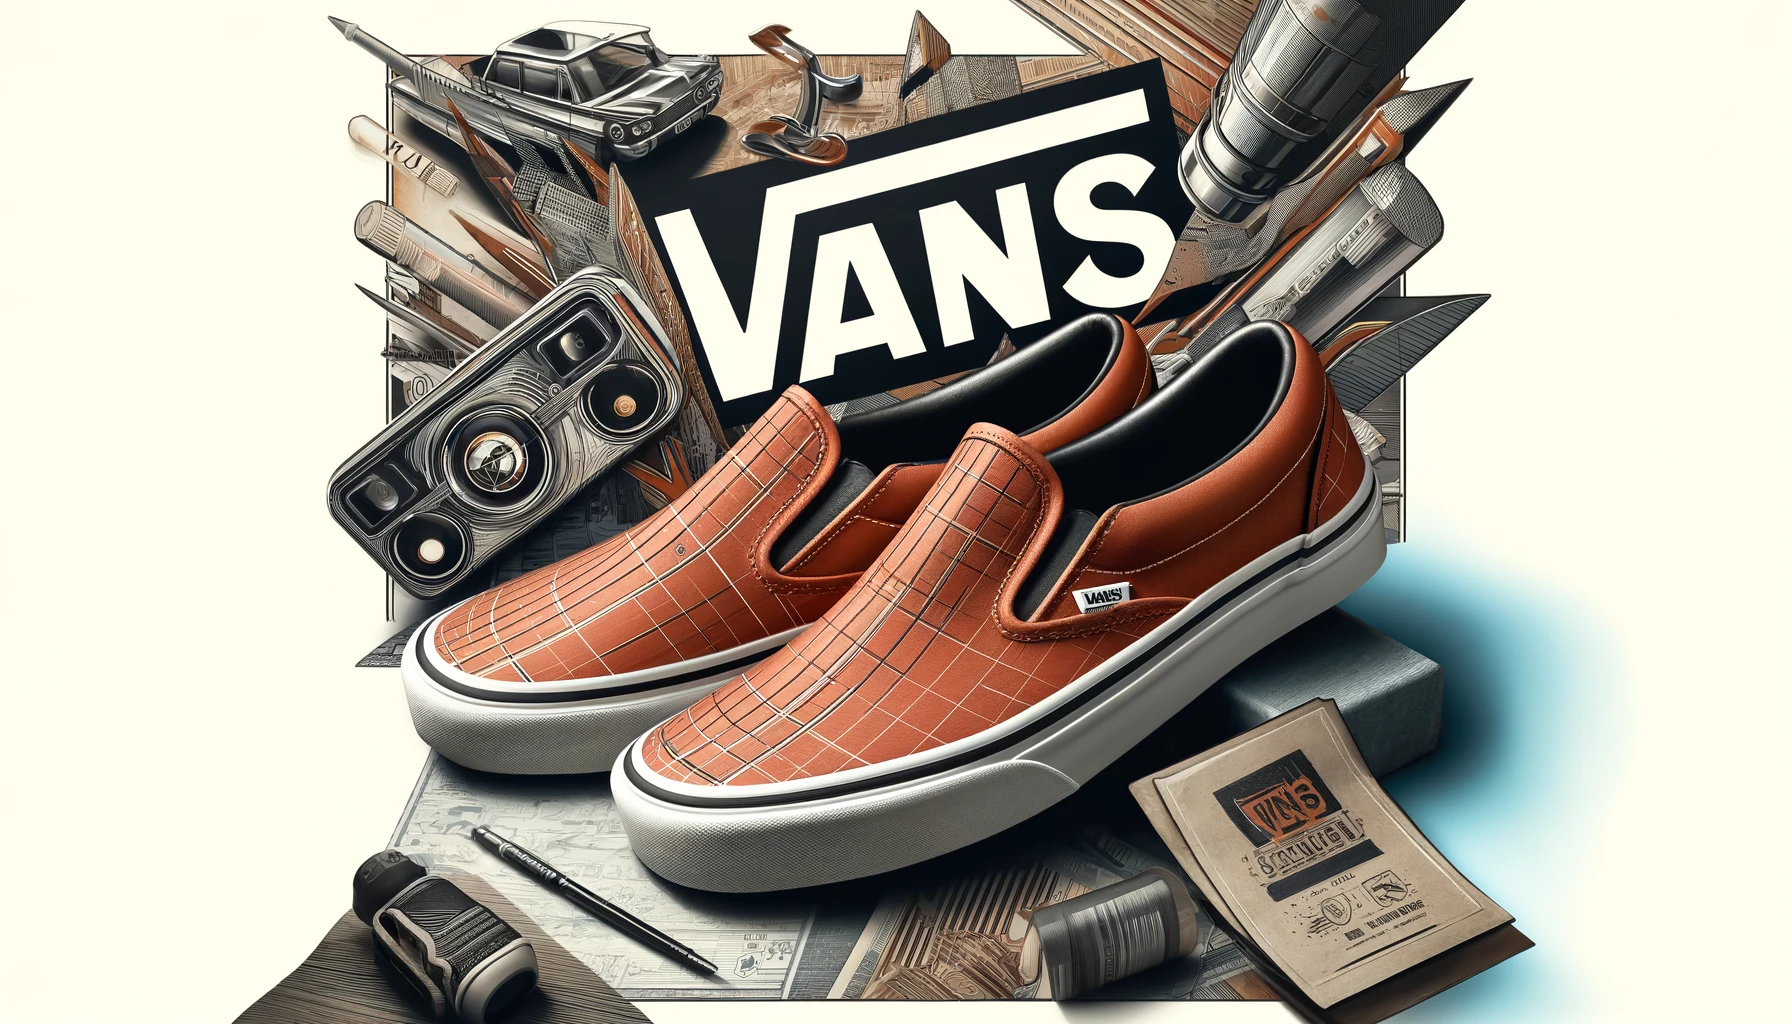 An image showcasing VANS slip-on shoes with a stylish background, featuring the text 'VANS' prominently.